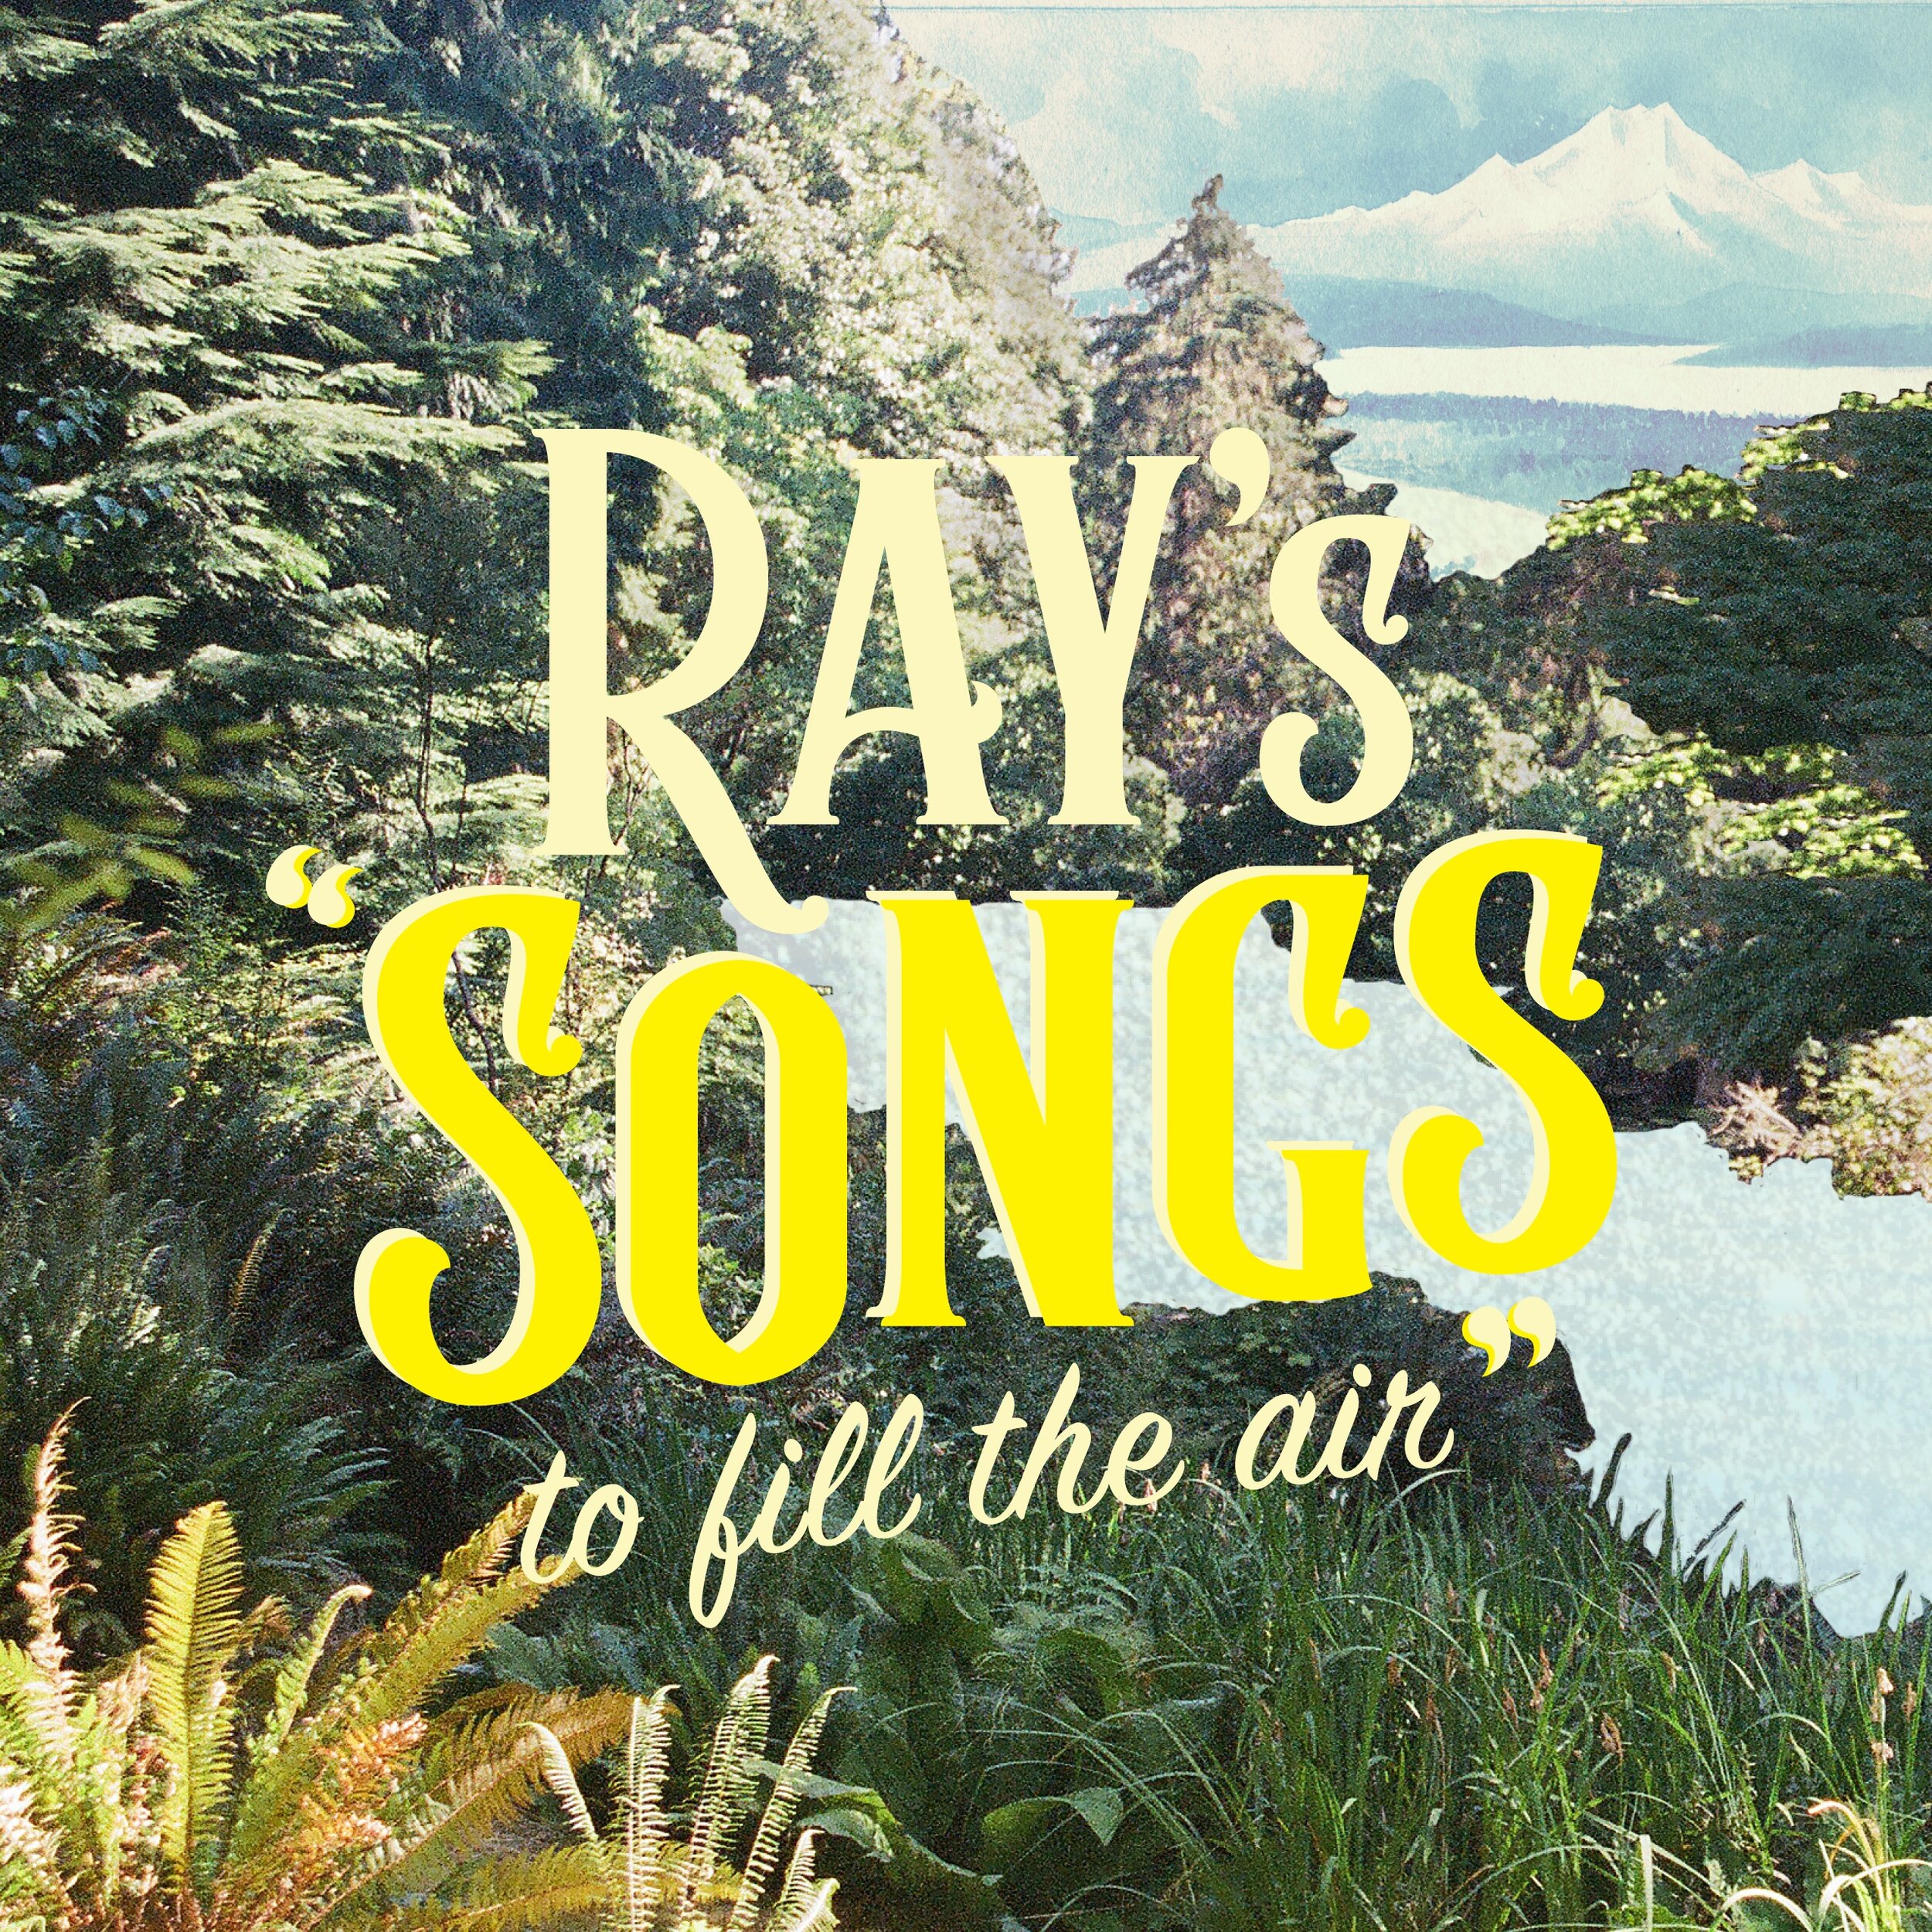  Ray Larsen  Songs to fill the air  to be released 4/3/20 